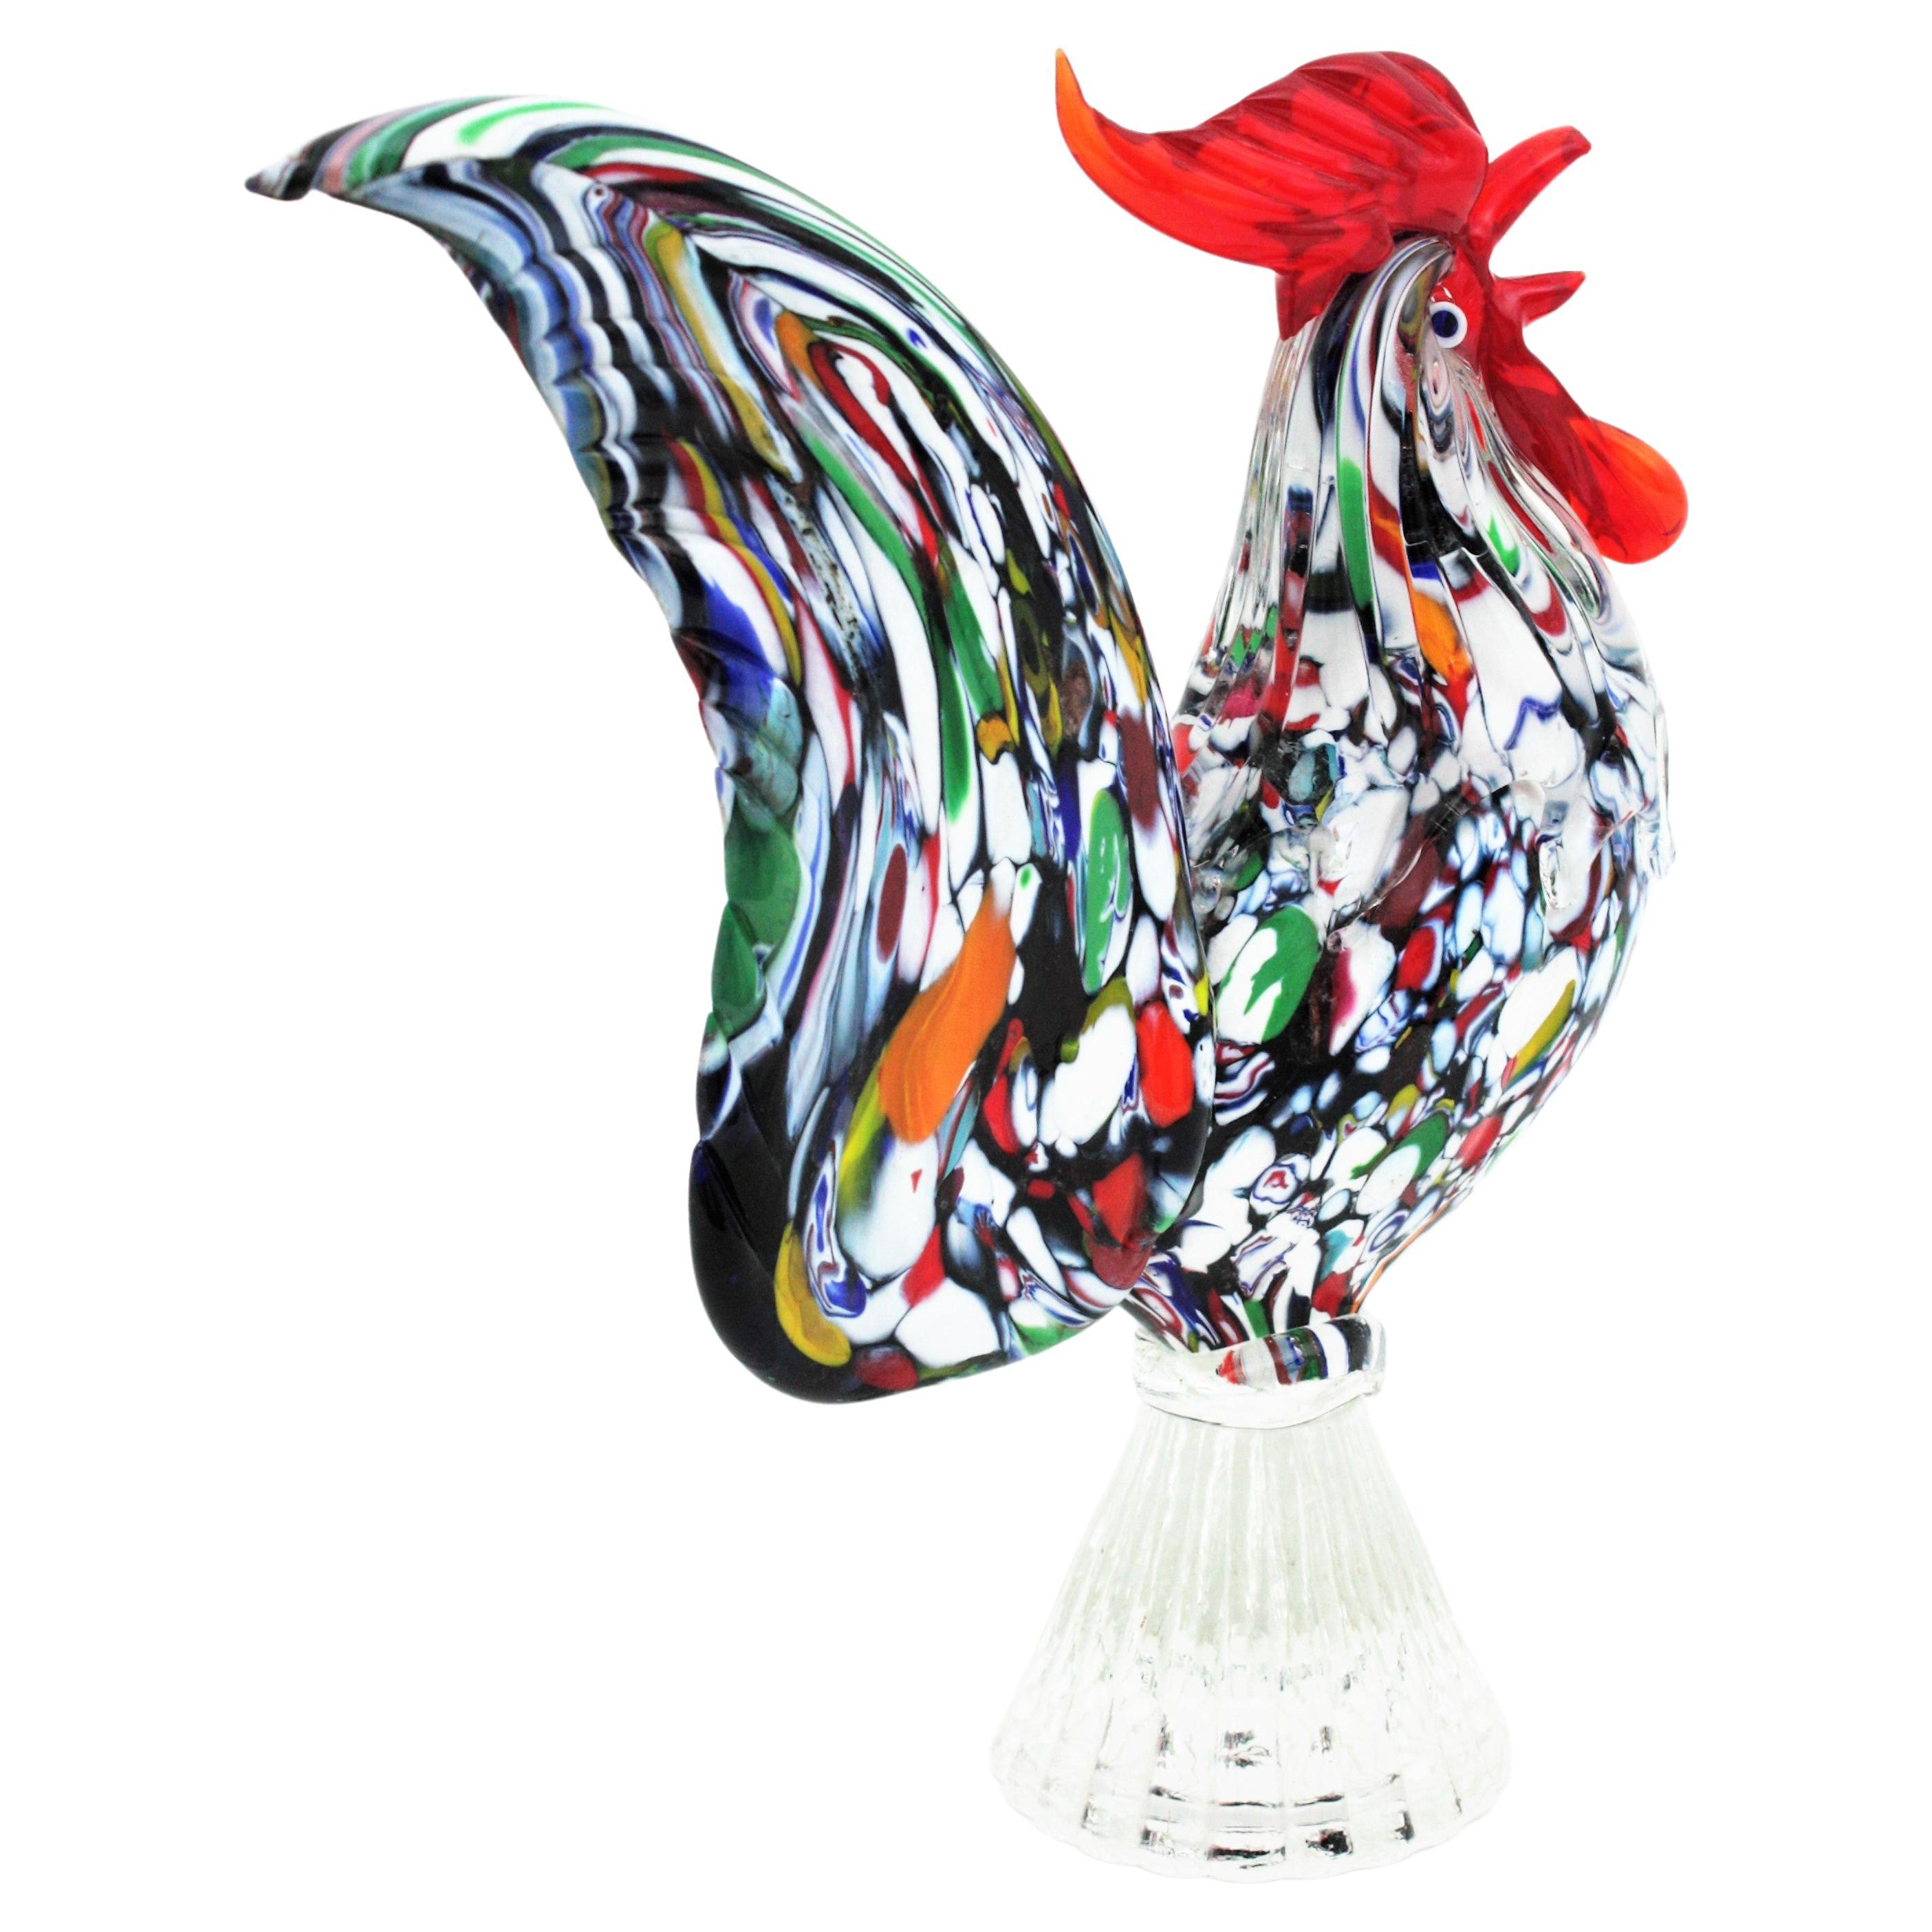 Colorful Mid-Century Modern Murano Millefiori Murrine Art glass rooster figurine. Attributed to Fratelli Toso, Italy, 1960s.
This eye-catching cock rooster blown glass sculpture or paperweight features an exquisite Master work with hundreds of